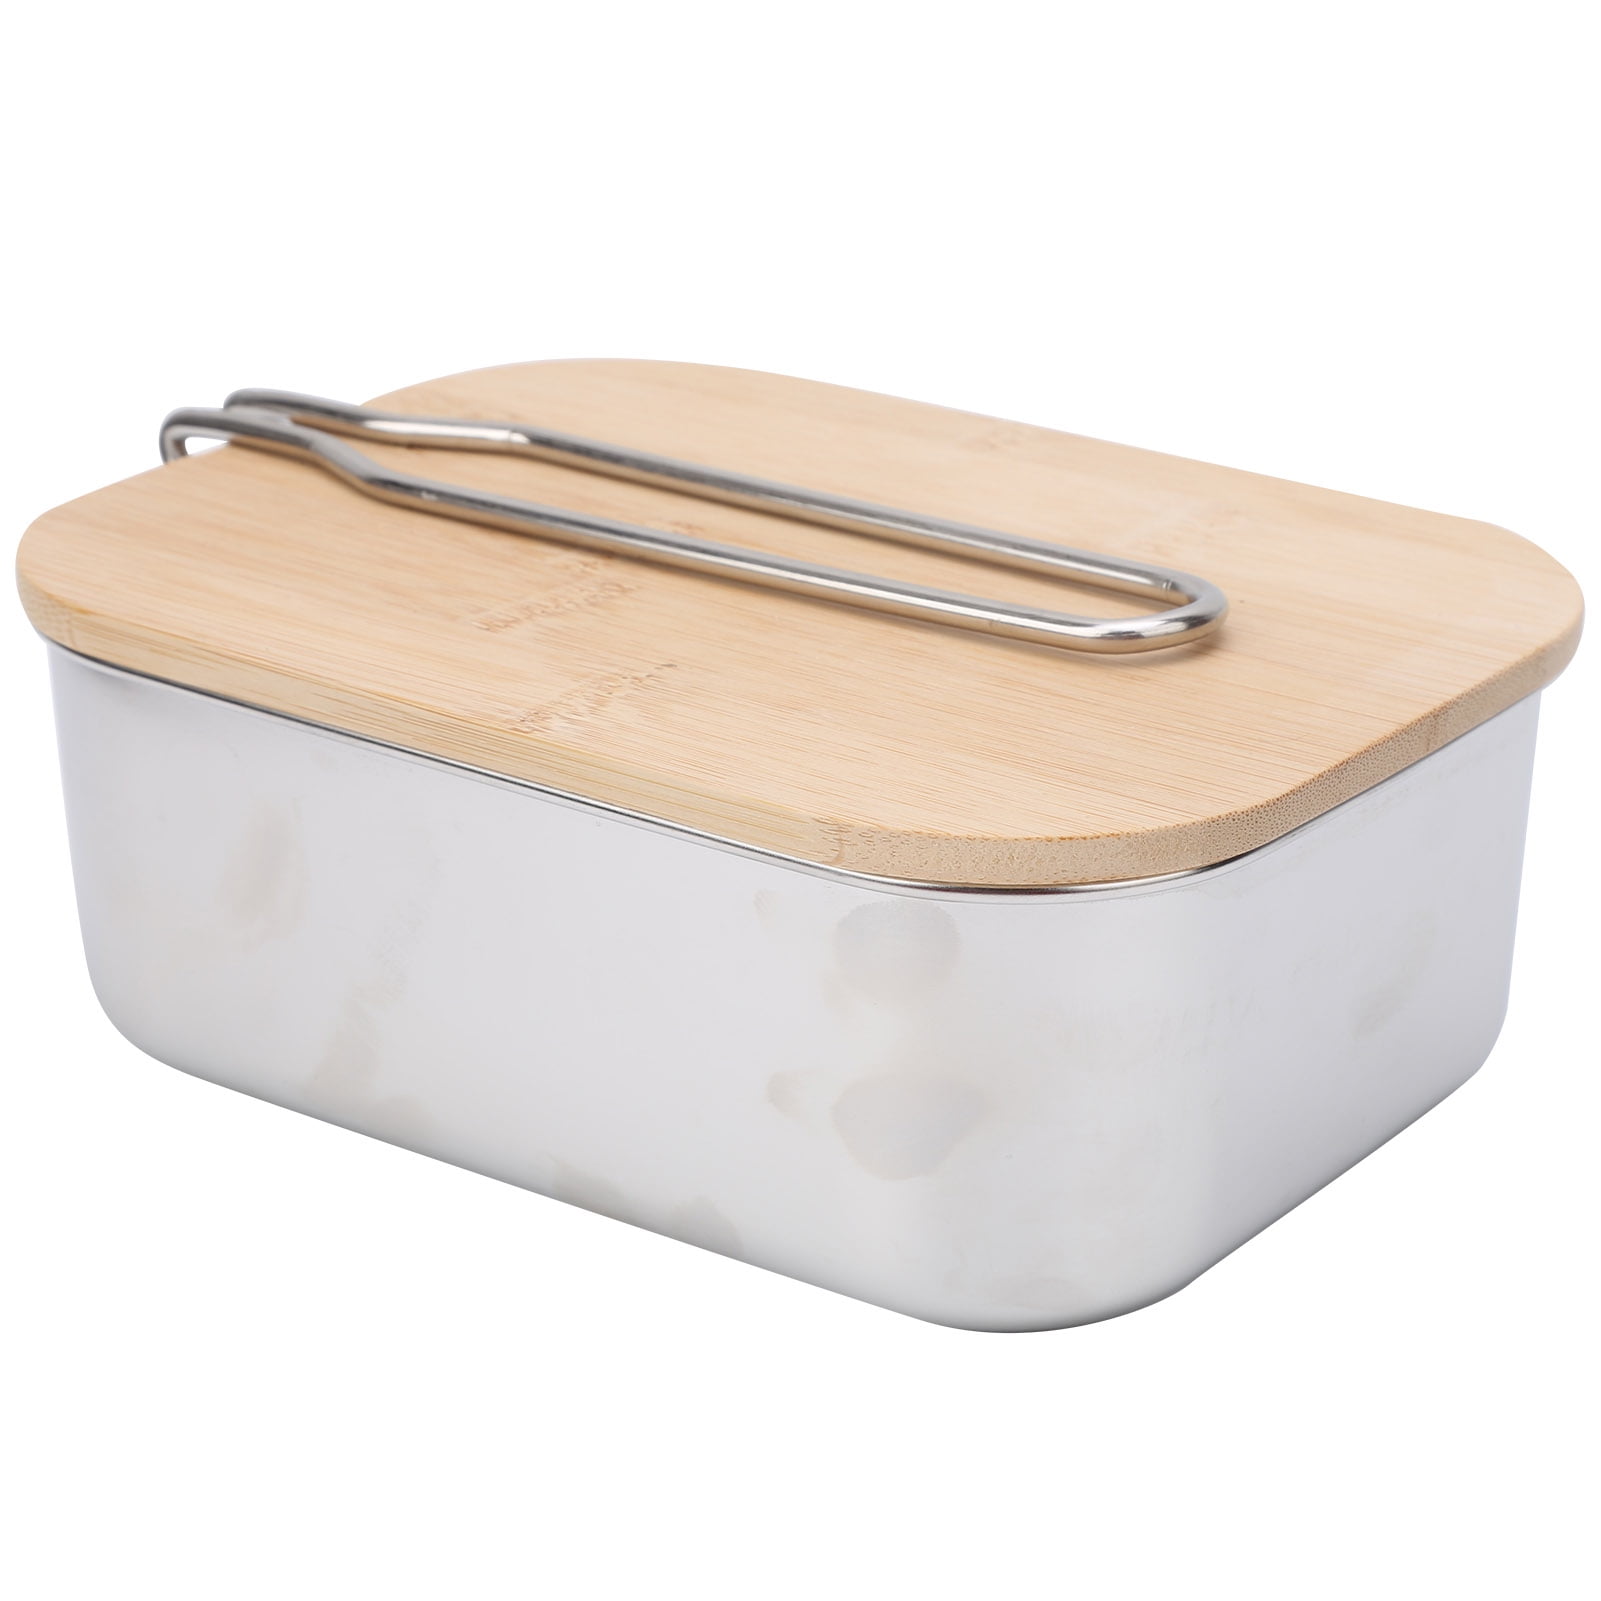 Steel Lunch Storage Box With Bamboo Lid Portable Camping Picnic Food Container 